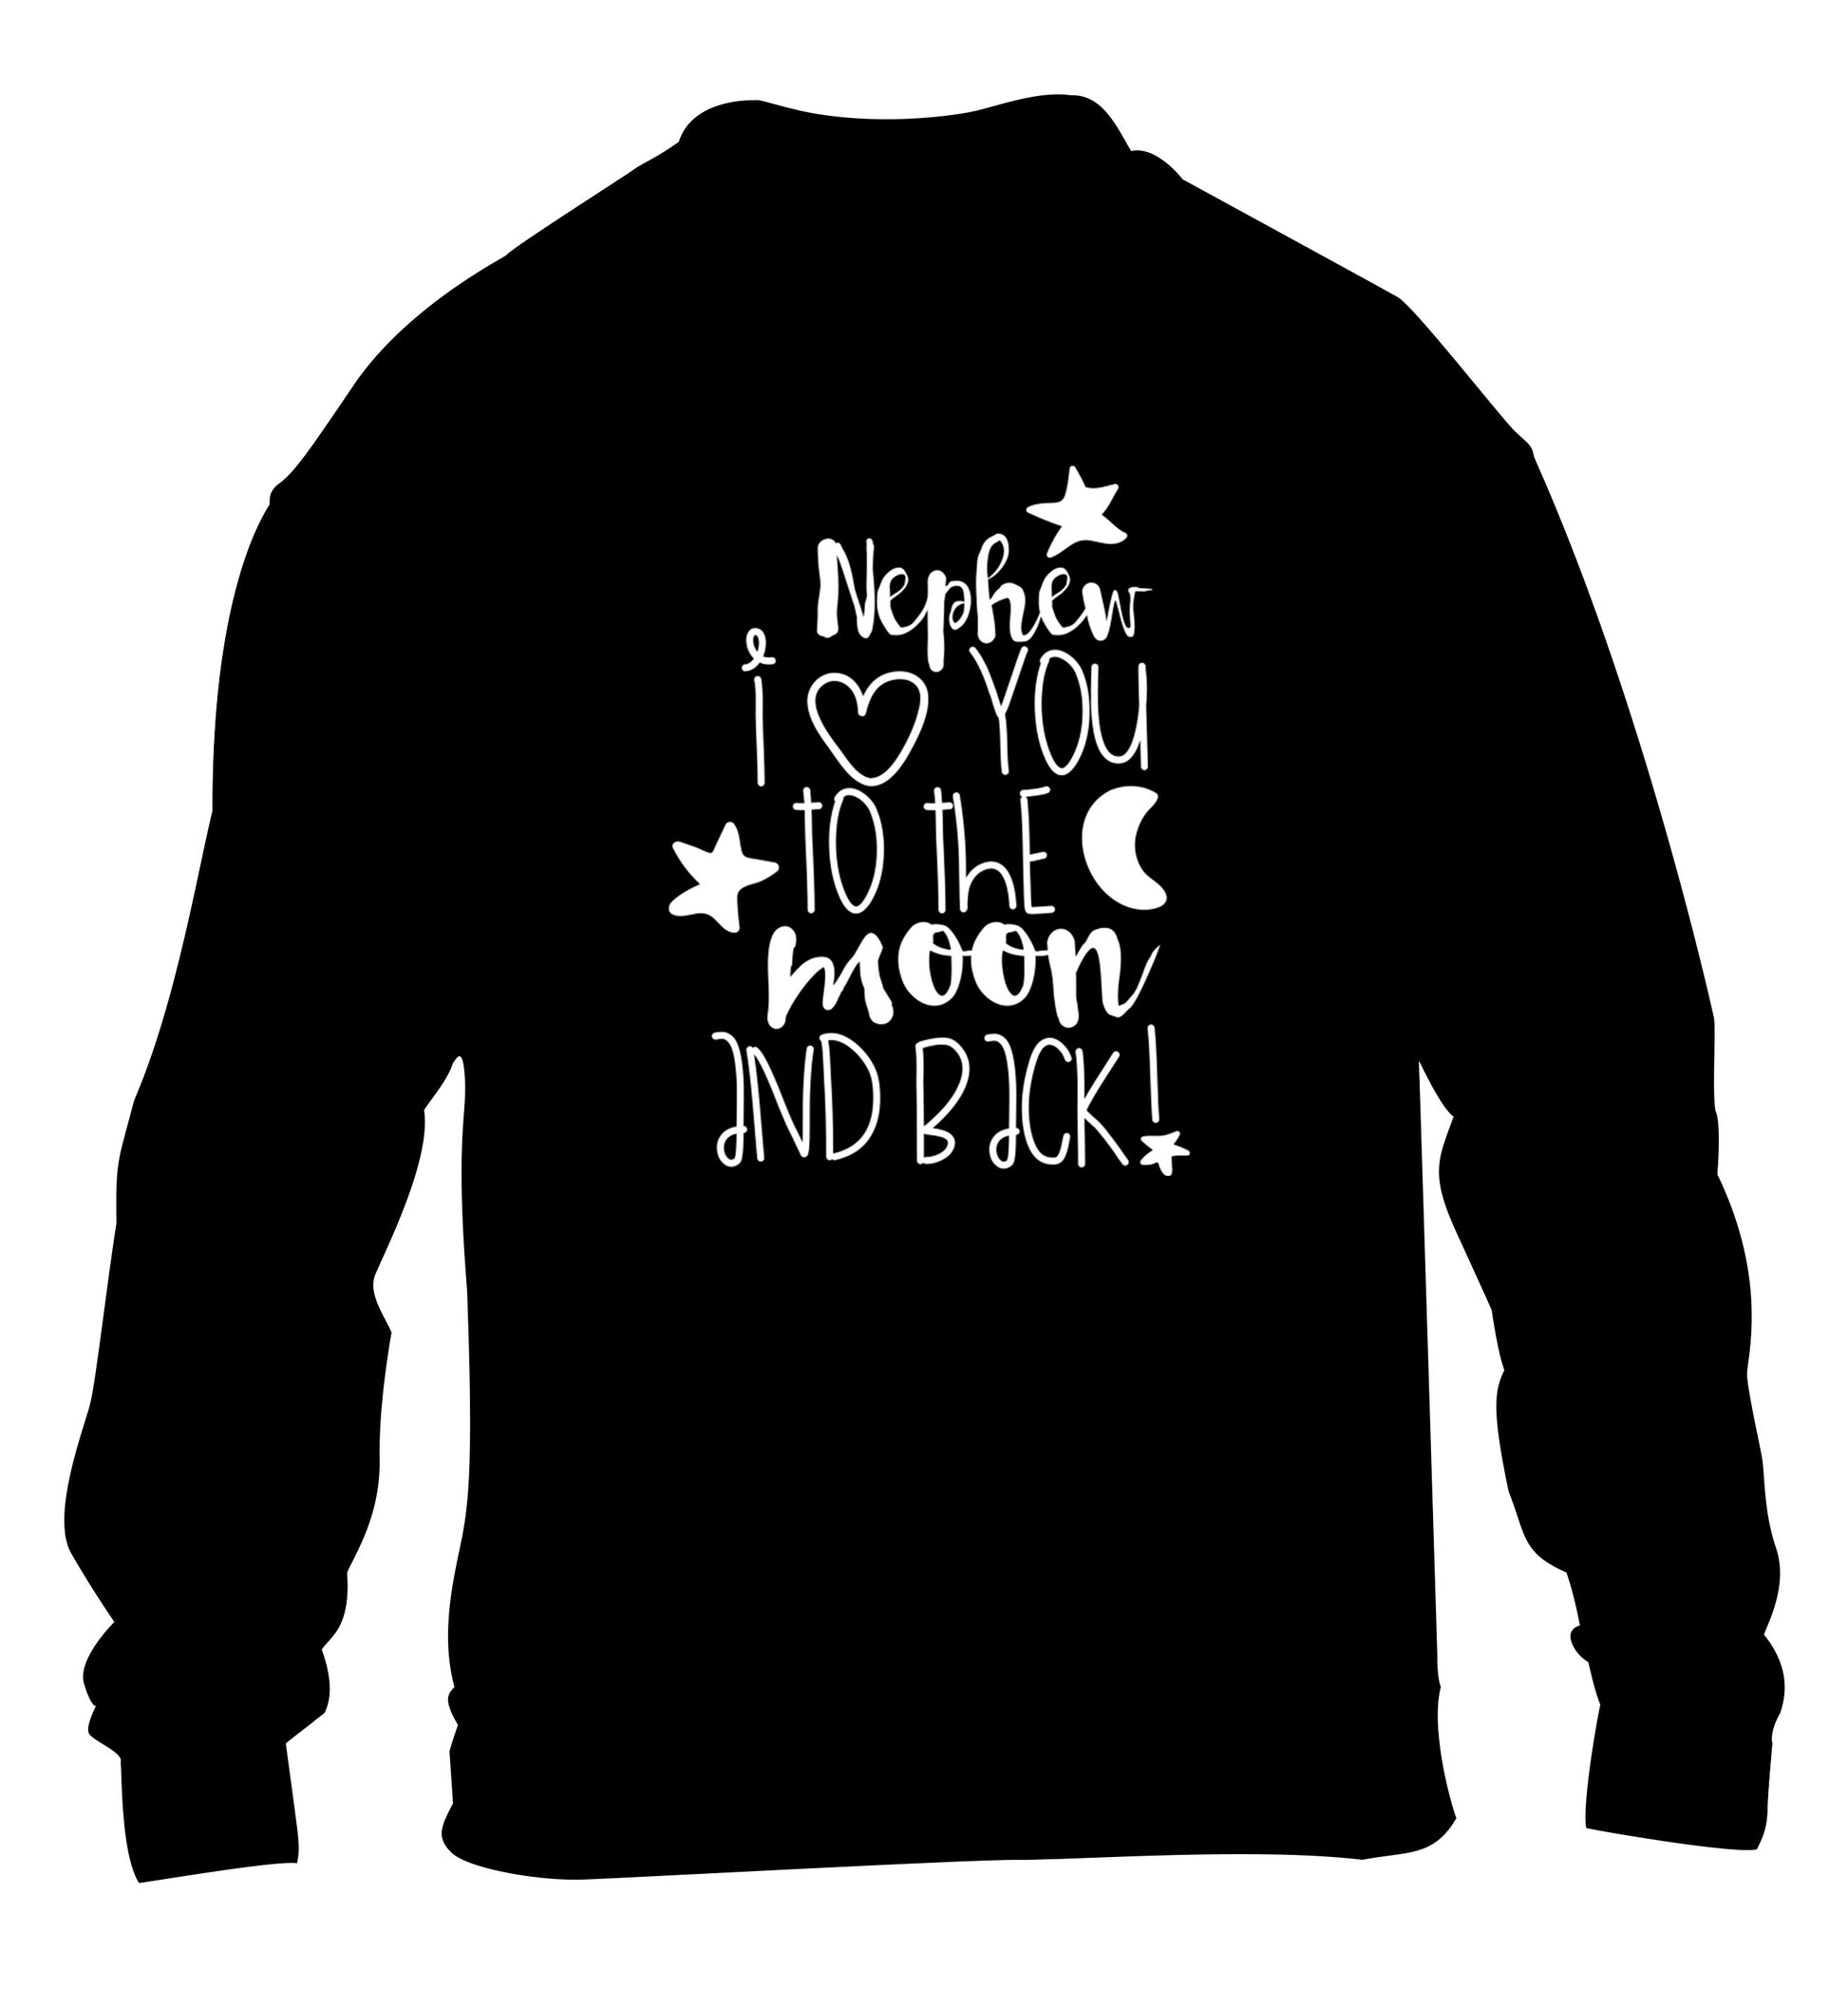 Nephew I love you to the moon and back children's black  sweater 12-14 Years